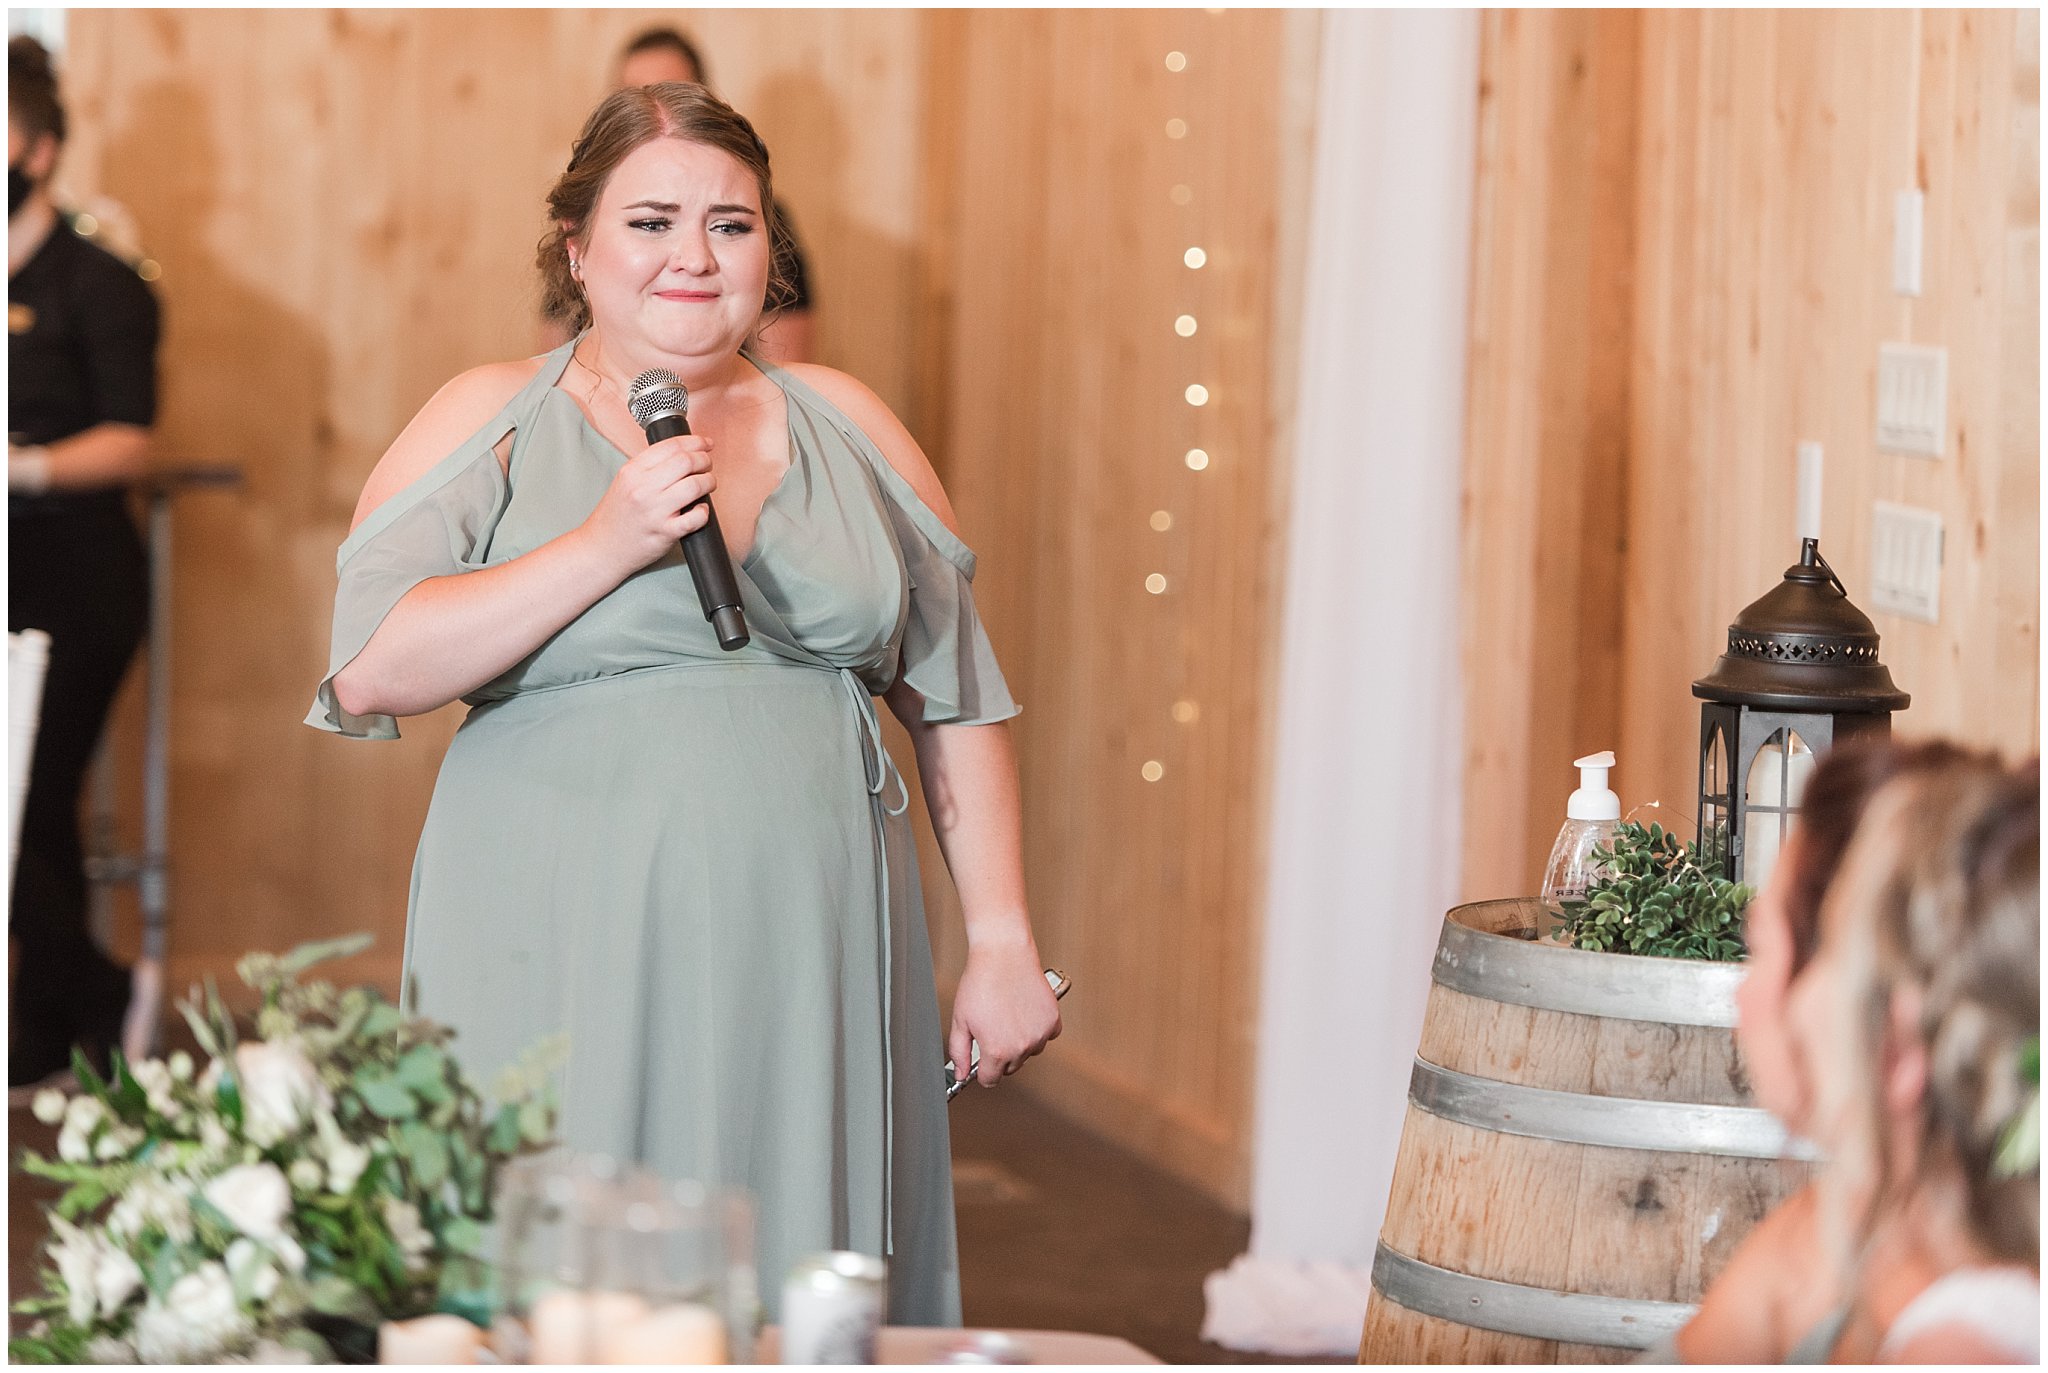 Dinner during Oak Hills wedding with toasts and reactions | Sage Green and Gray Summer Wedding at Oak Hills | Jessie and Dallin Photography